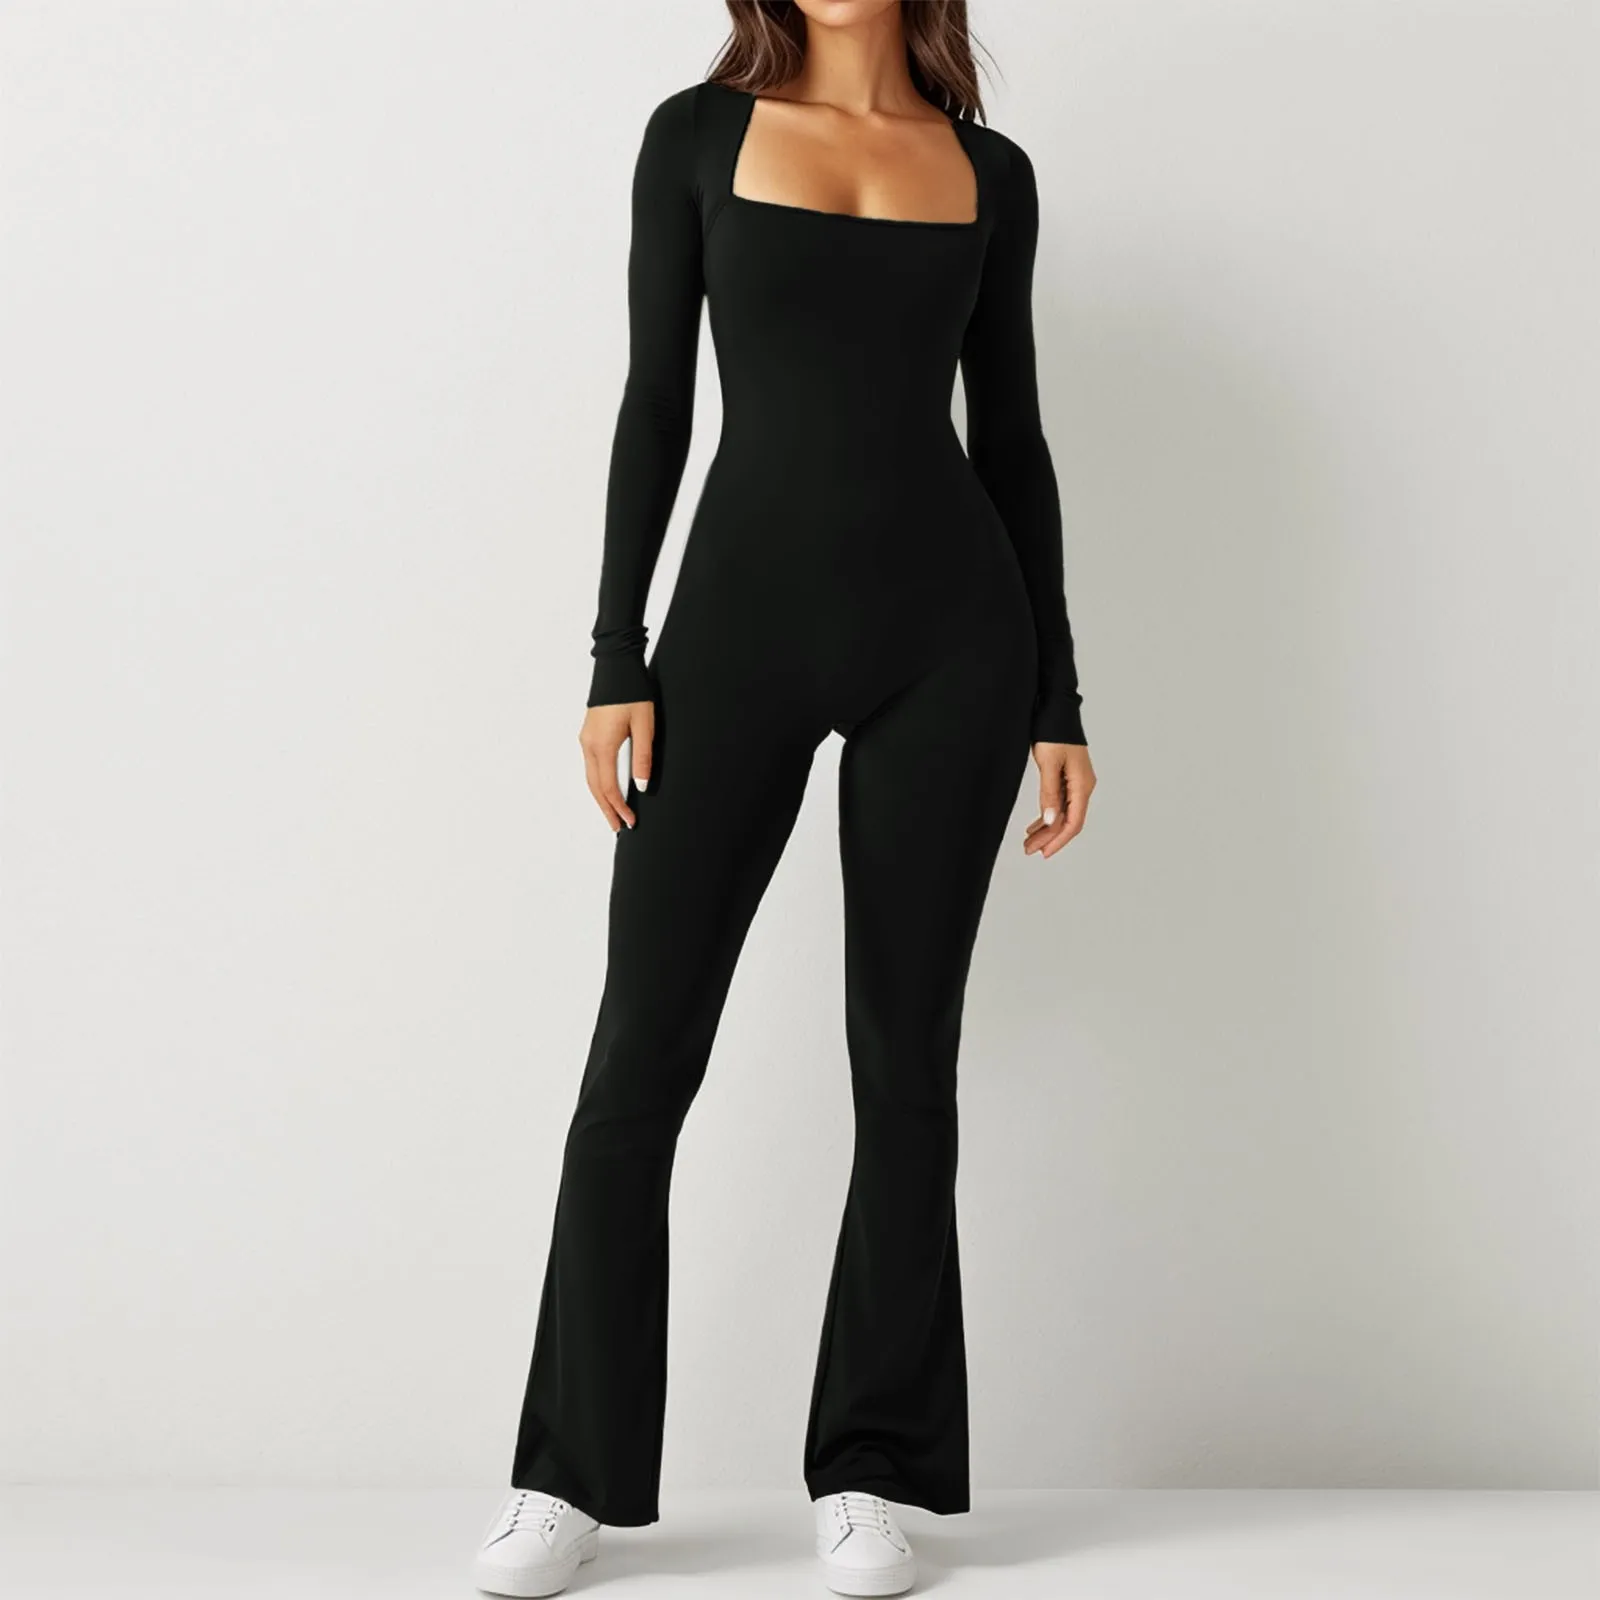 

Long Sleeve Jumpsuit Women Tight Fitting Square Neck Wide Leg Full Length Romper Playsuit Bodycon Women'S Long Overalls